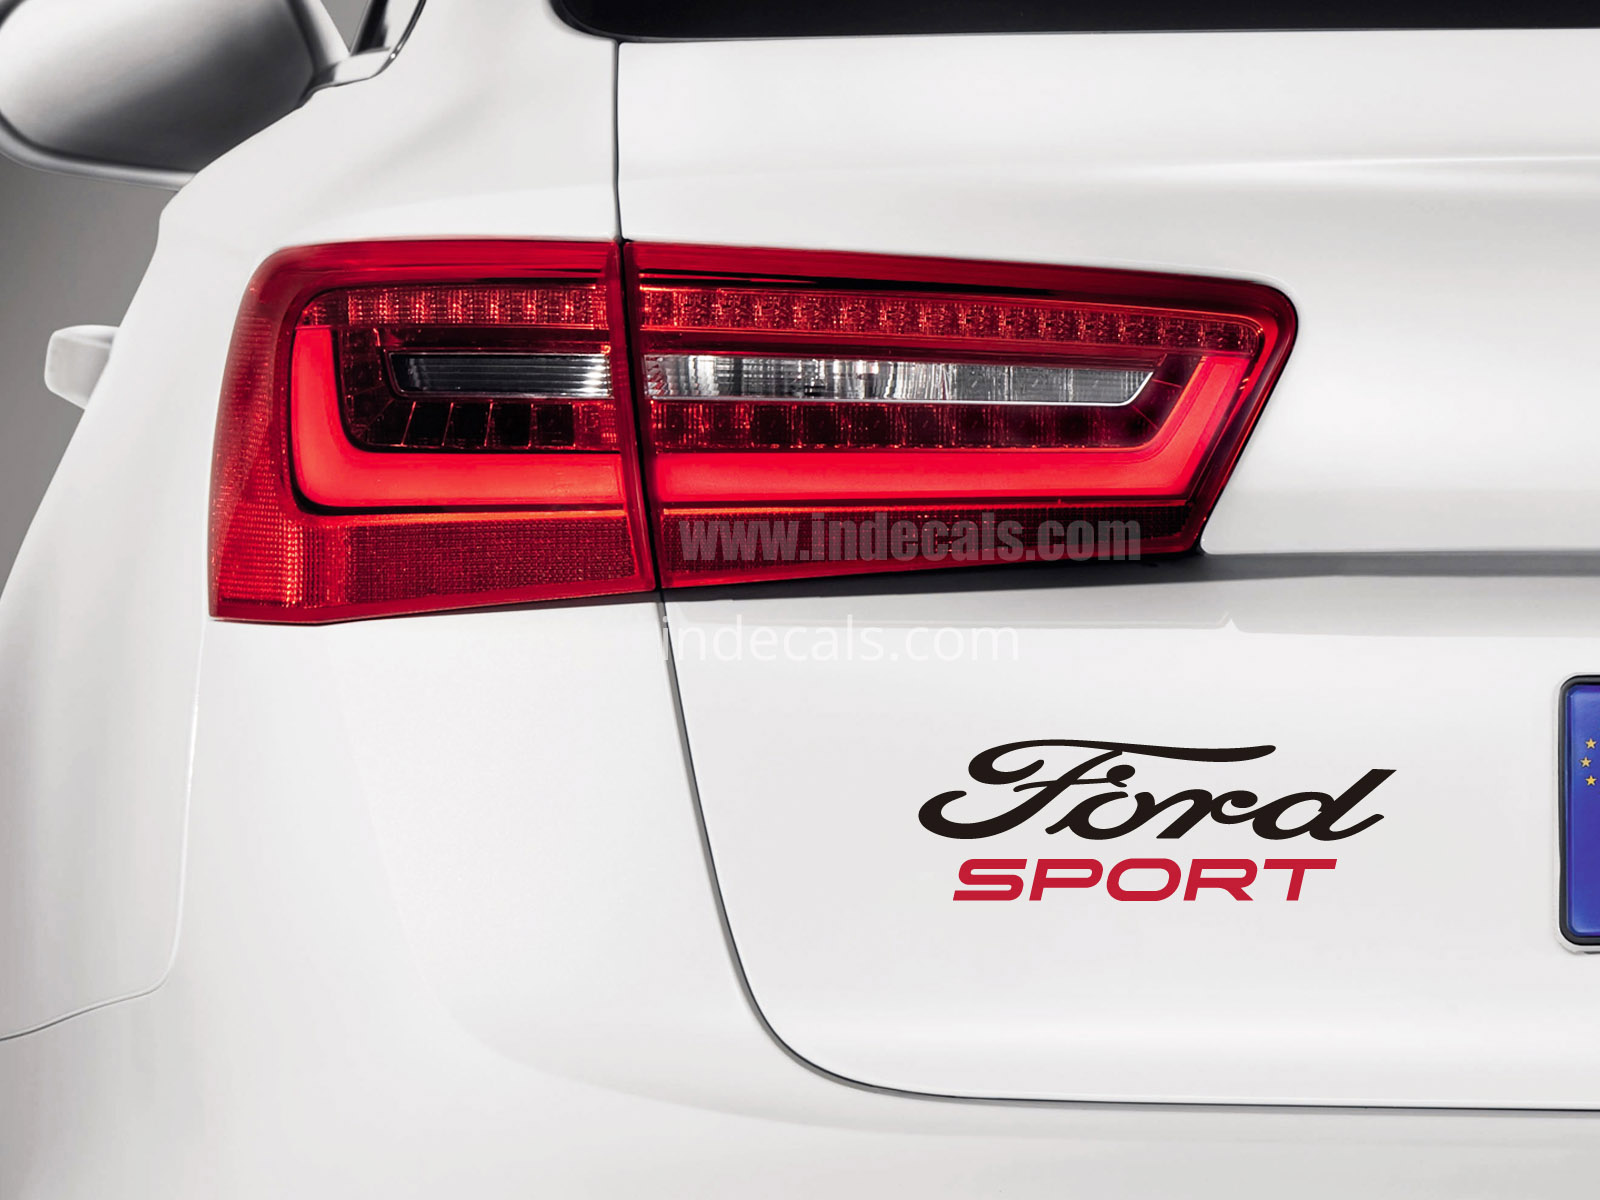 1 x Ford Sports Sticker for Trunk - Black & Red